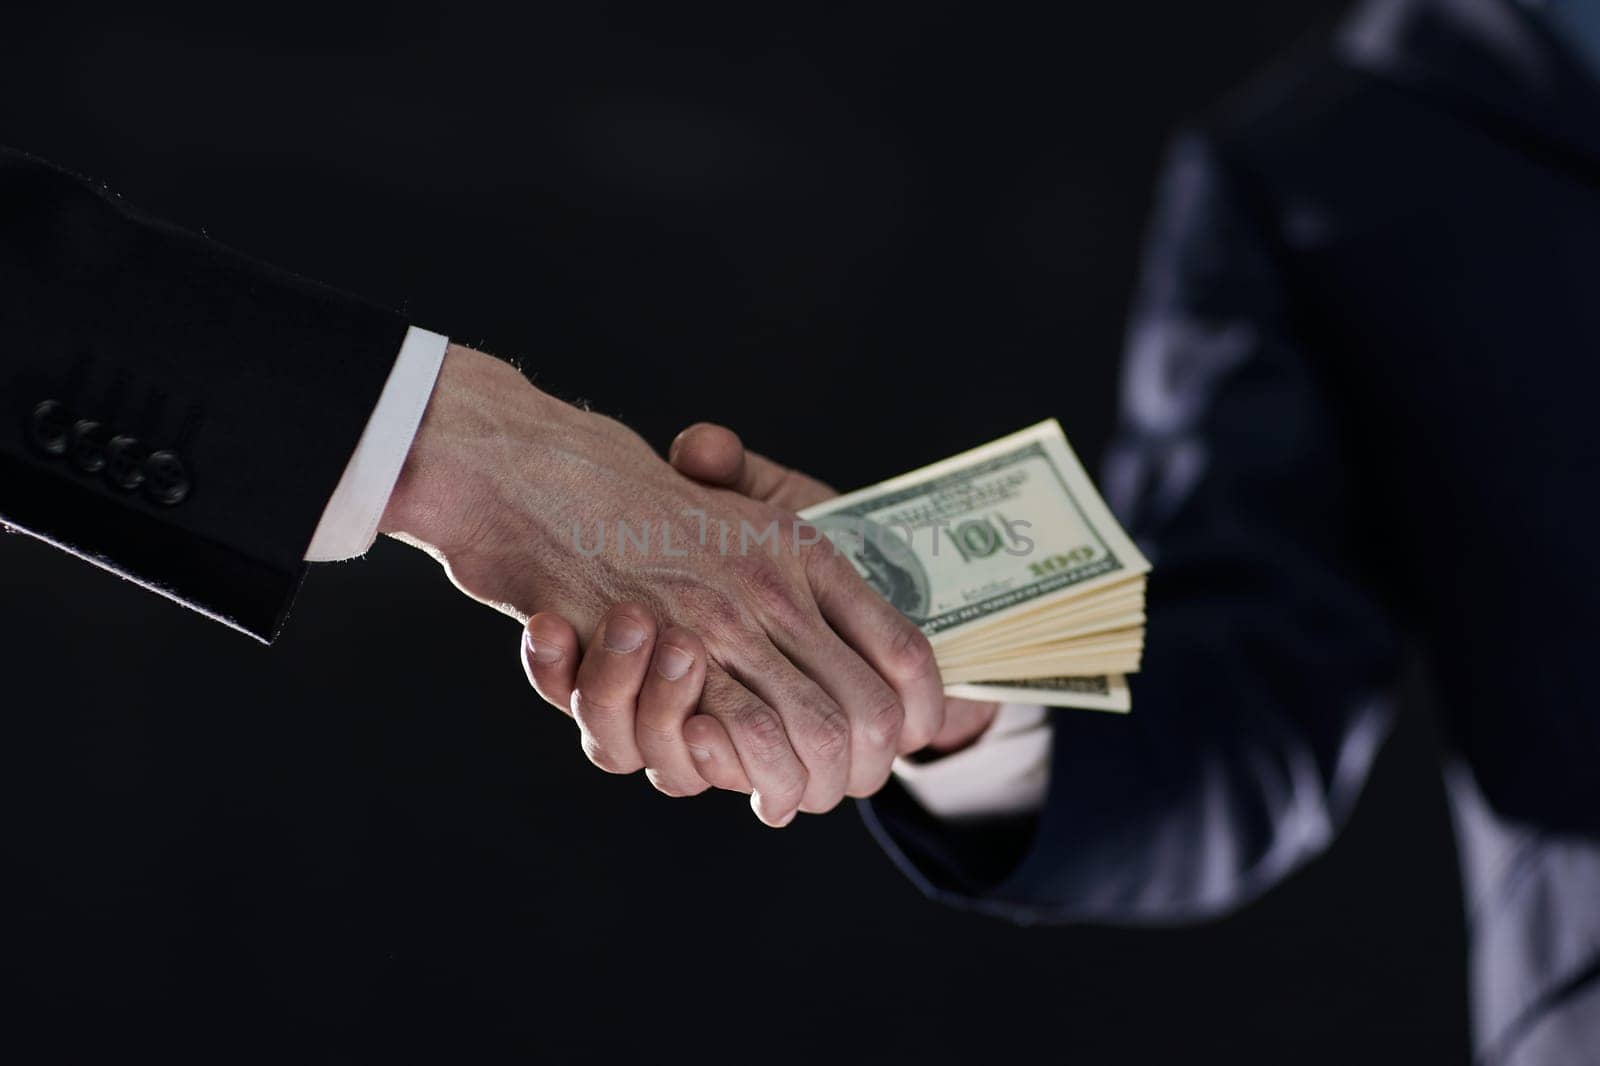 Close-up image of handshake between two colleagues.